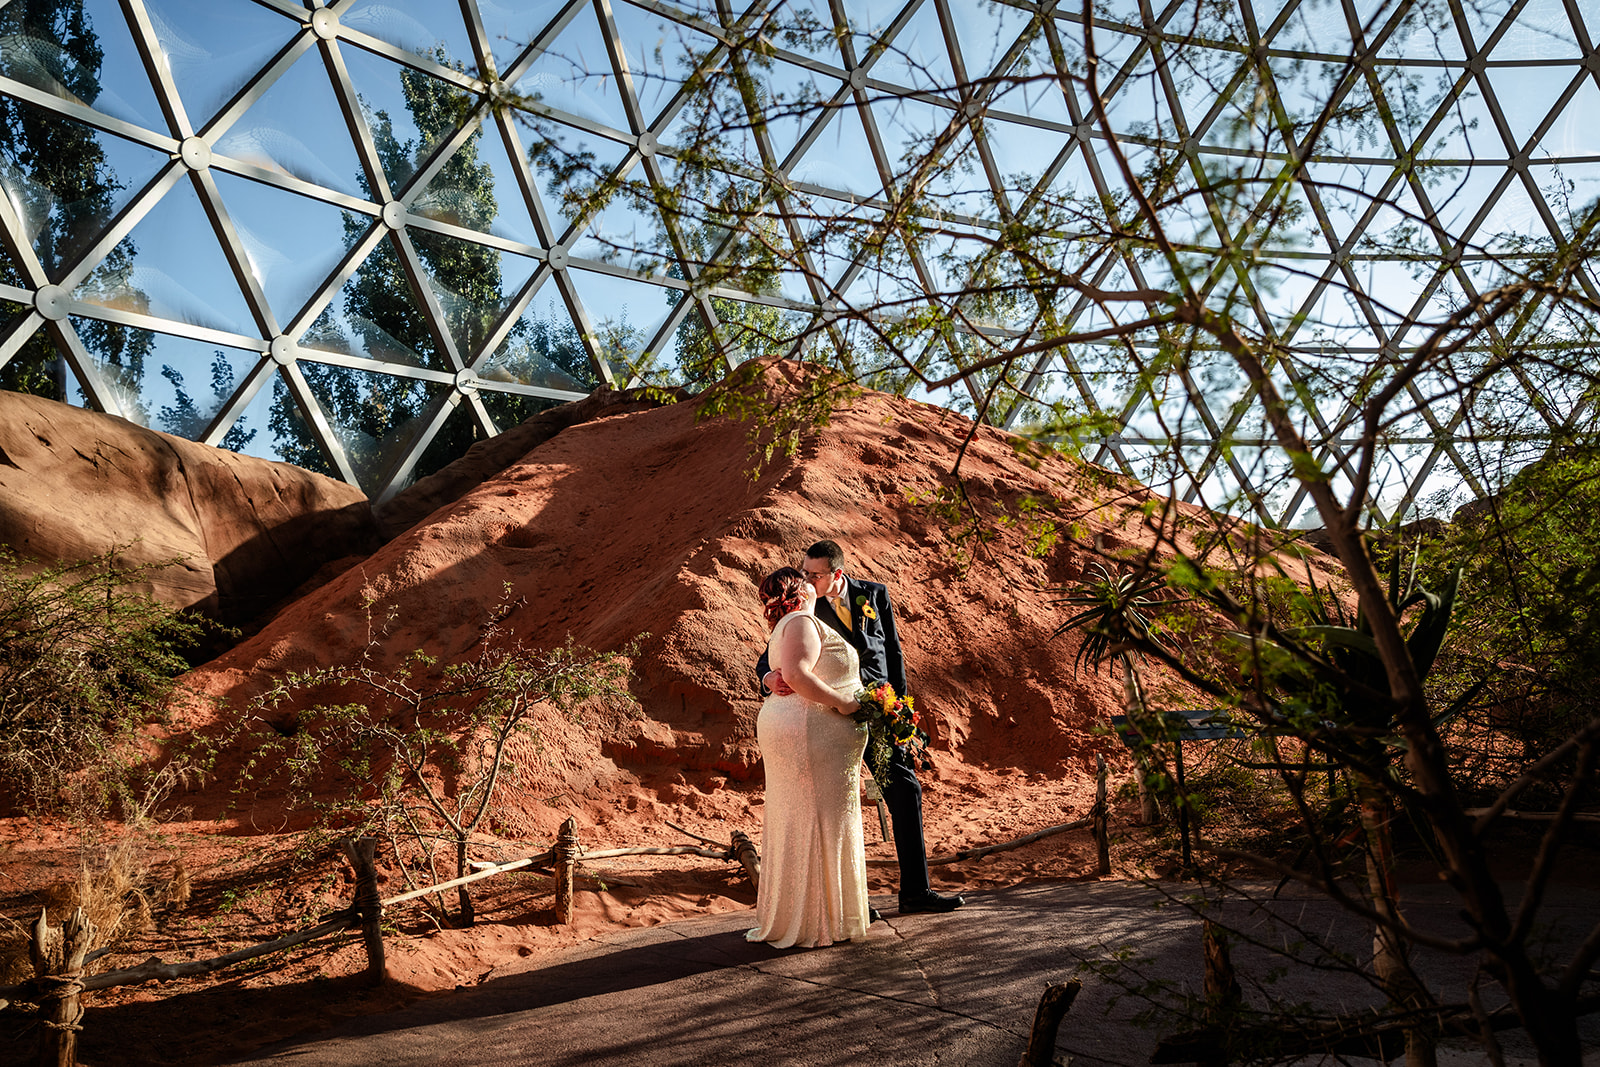 Bride and Groom on their wedding day in the desert dome at Omaha Henry Doorly Zoo